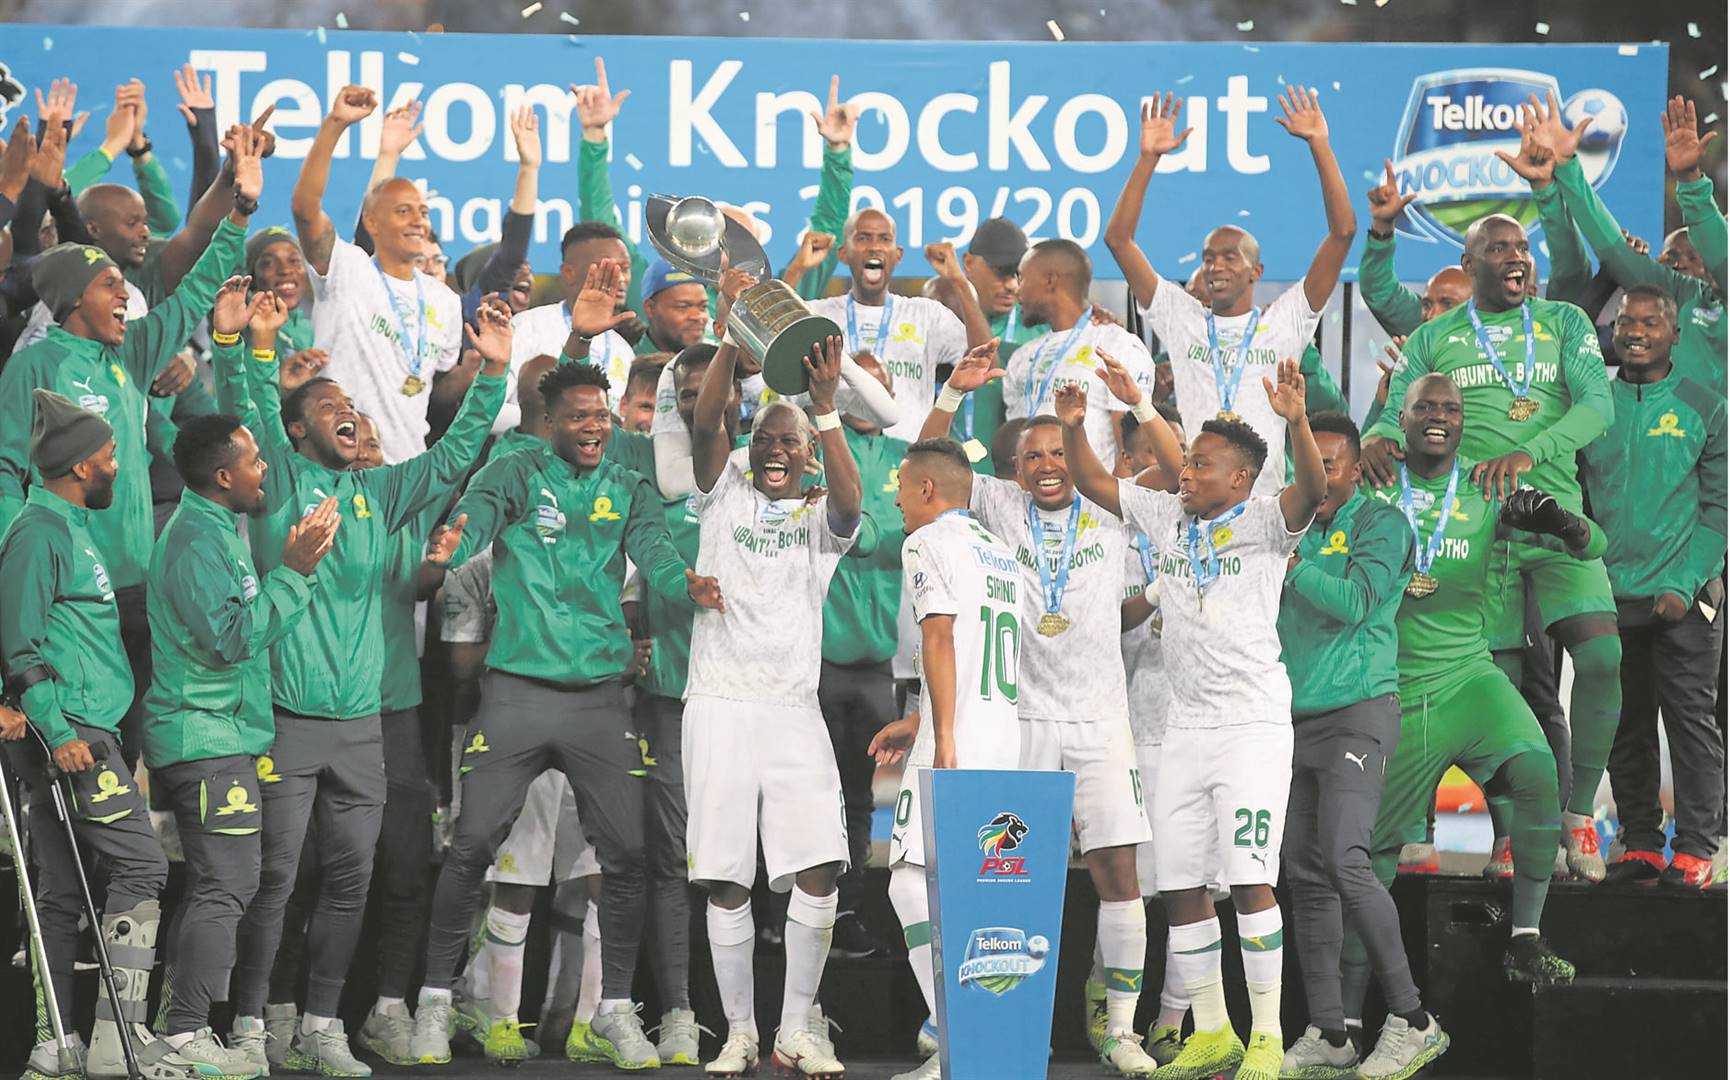 Mamelodi Sundowns are crowned winners of the Telkom Knockout after beating Maritzburg United at Moses Mabhida Stadium in Durban. Picture: Samuel Shivambu/BackpagePix